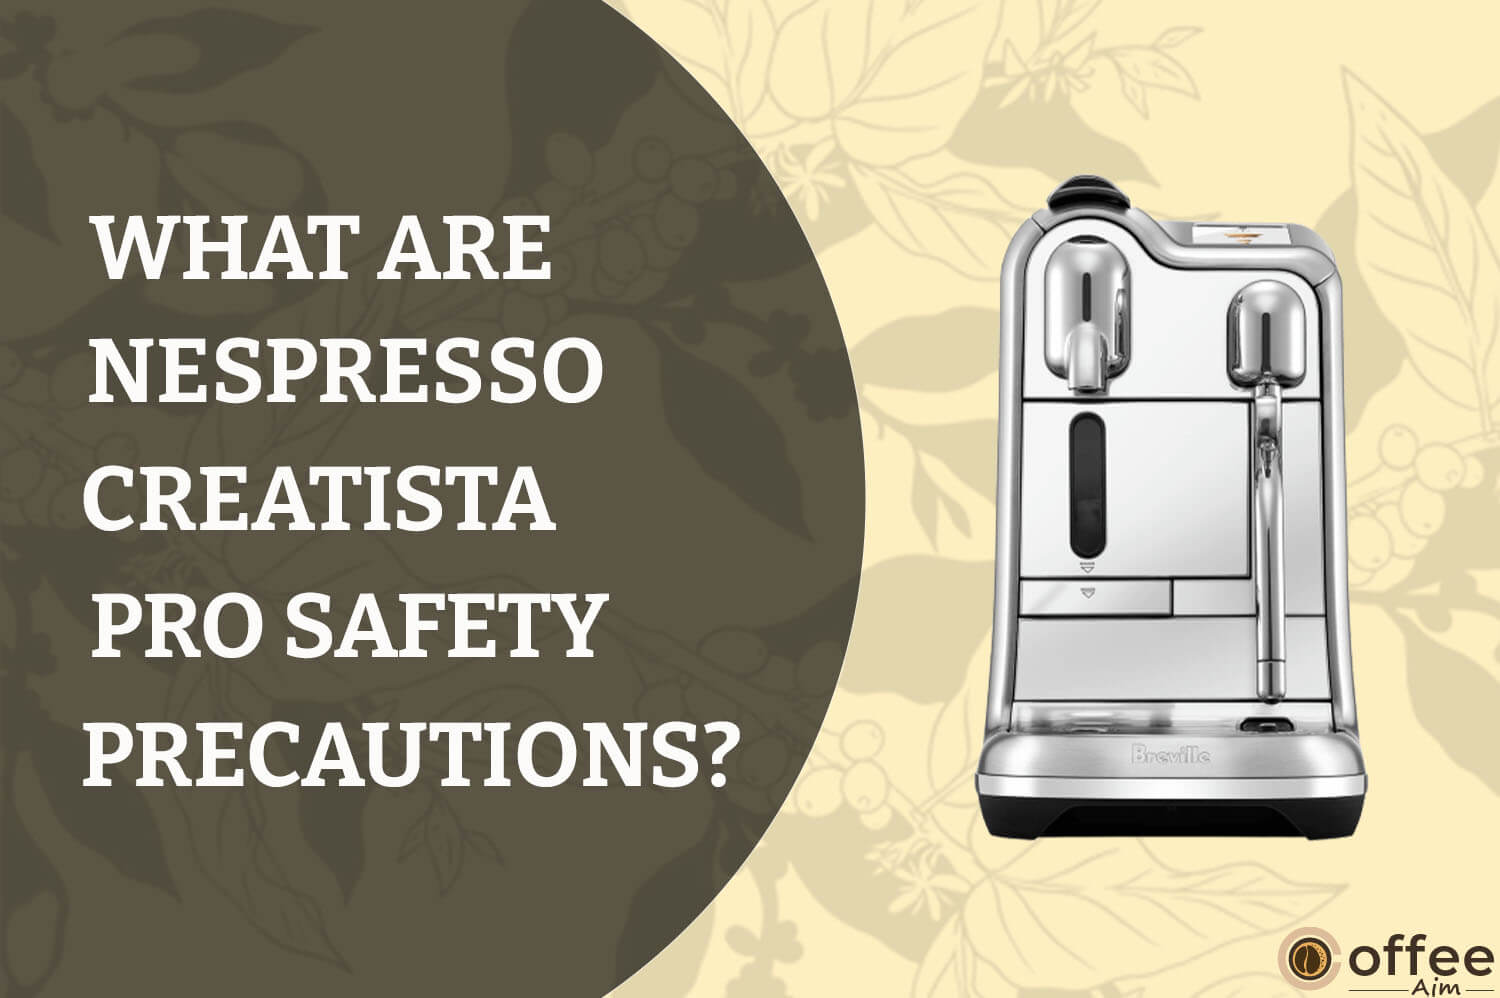 Featured image for the article "What are Nespresso Creatista Pro Safety Precautions"